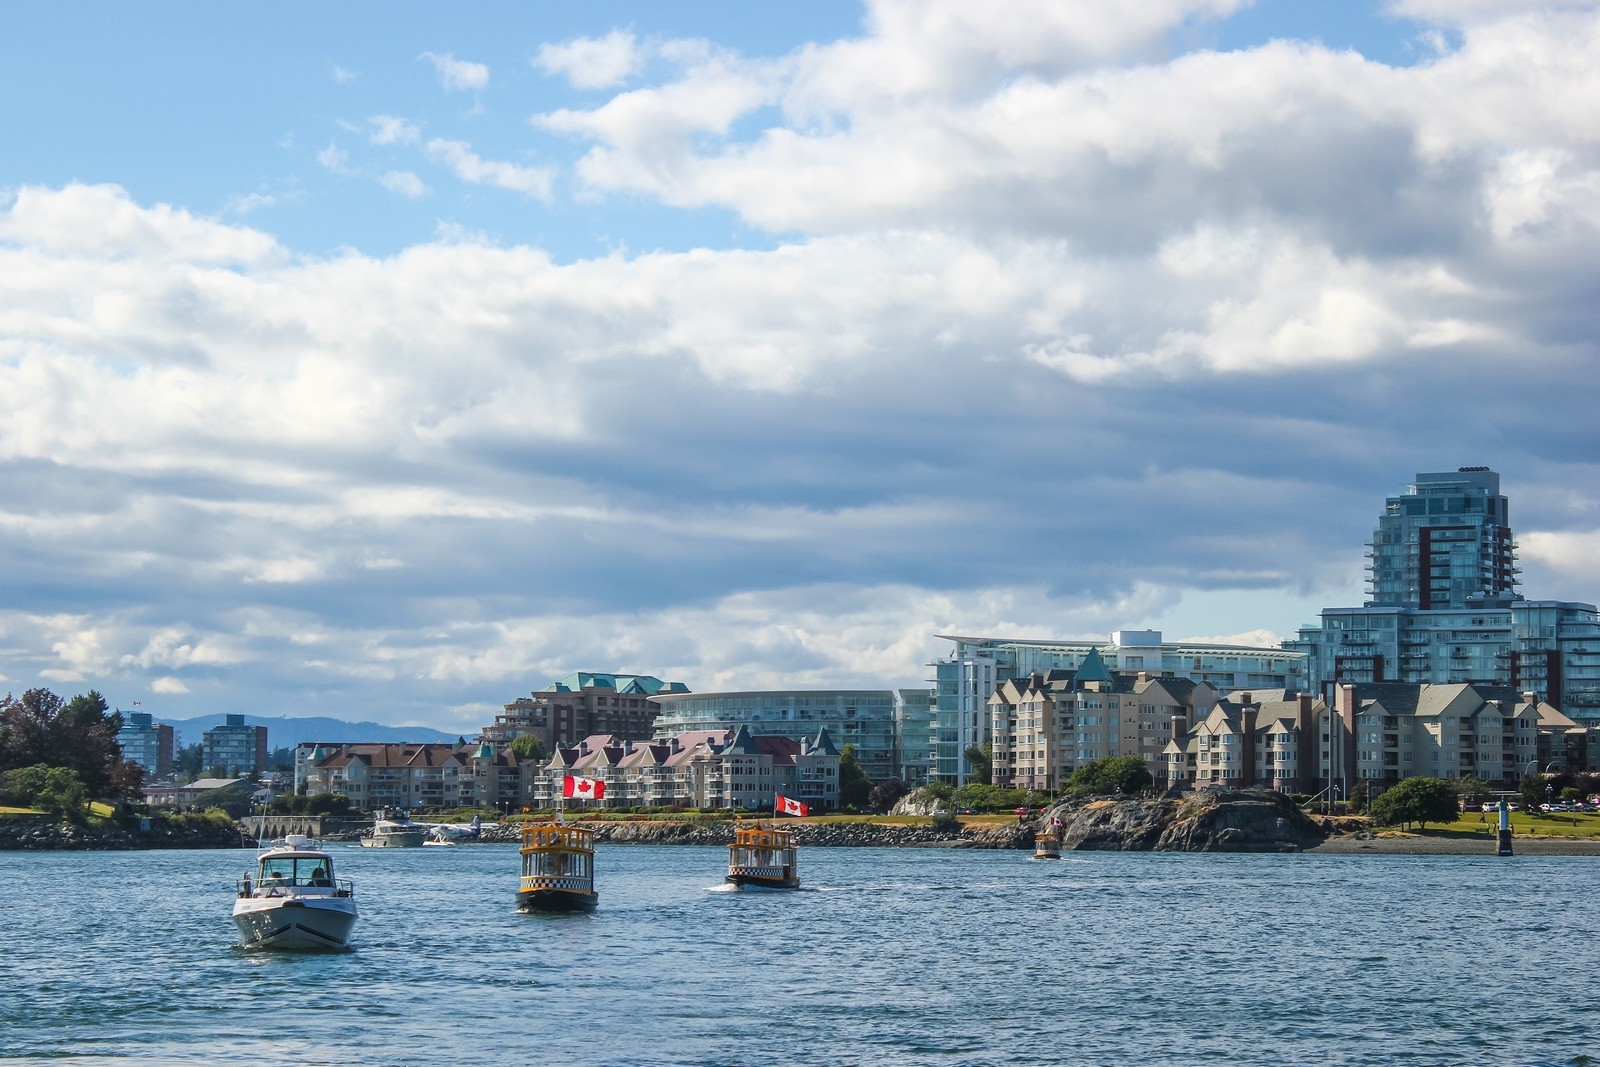 https://res.cloudinary.com/see-sight-tours/image/upload/v1581441874/Victoria-Harbour-Ferry.jpg